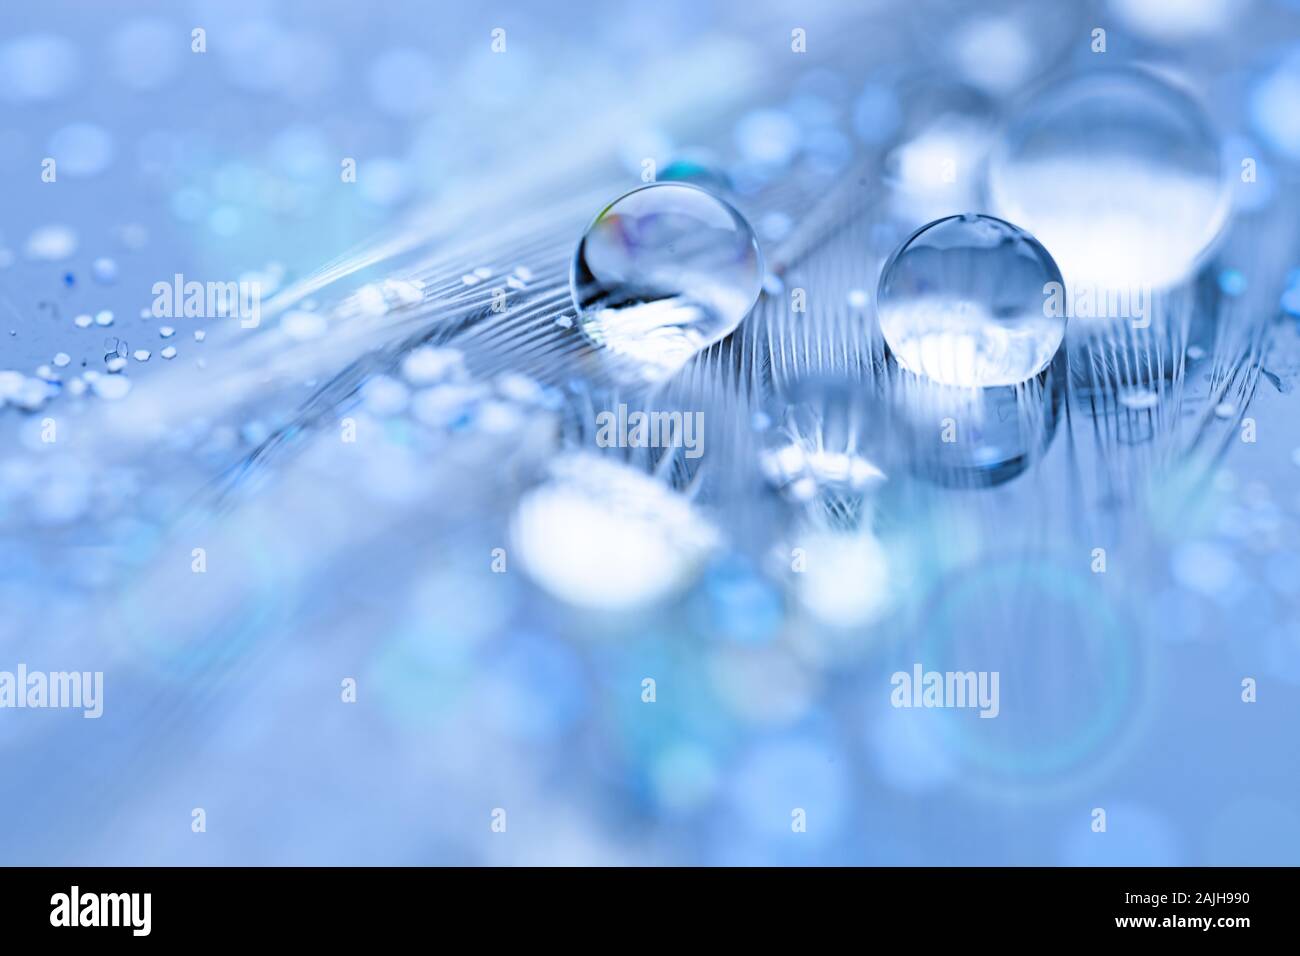 Beautiful transparent water drops or rain water on soft background. Macrophotography. Desktop background. Selective focus. Horizontal. Stock Photo